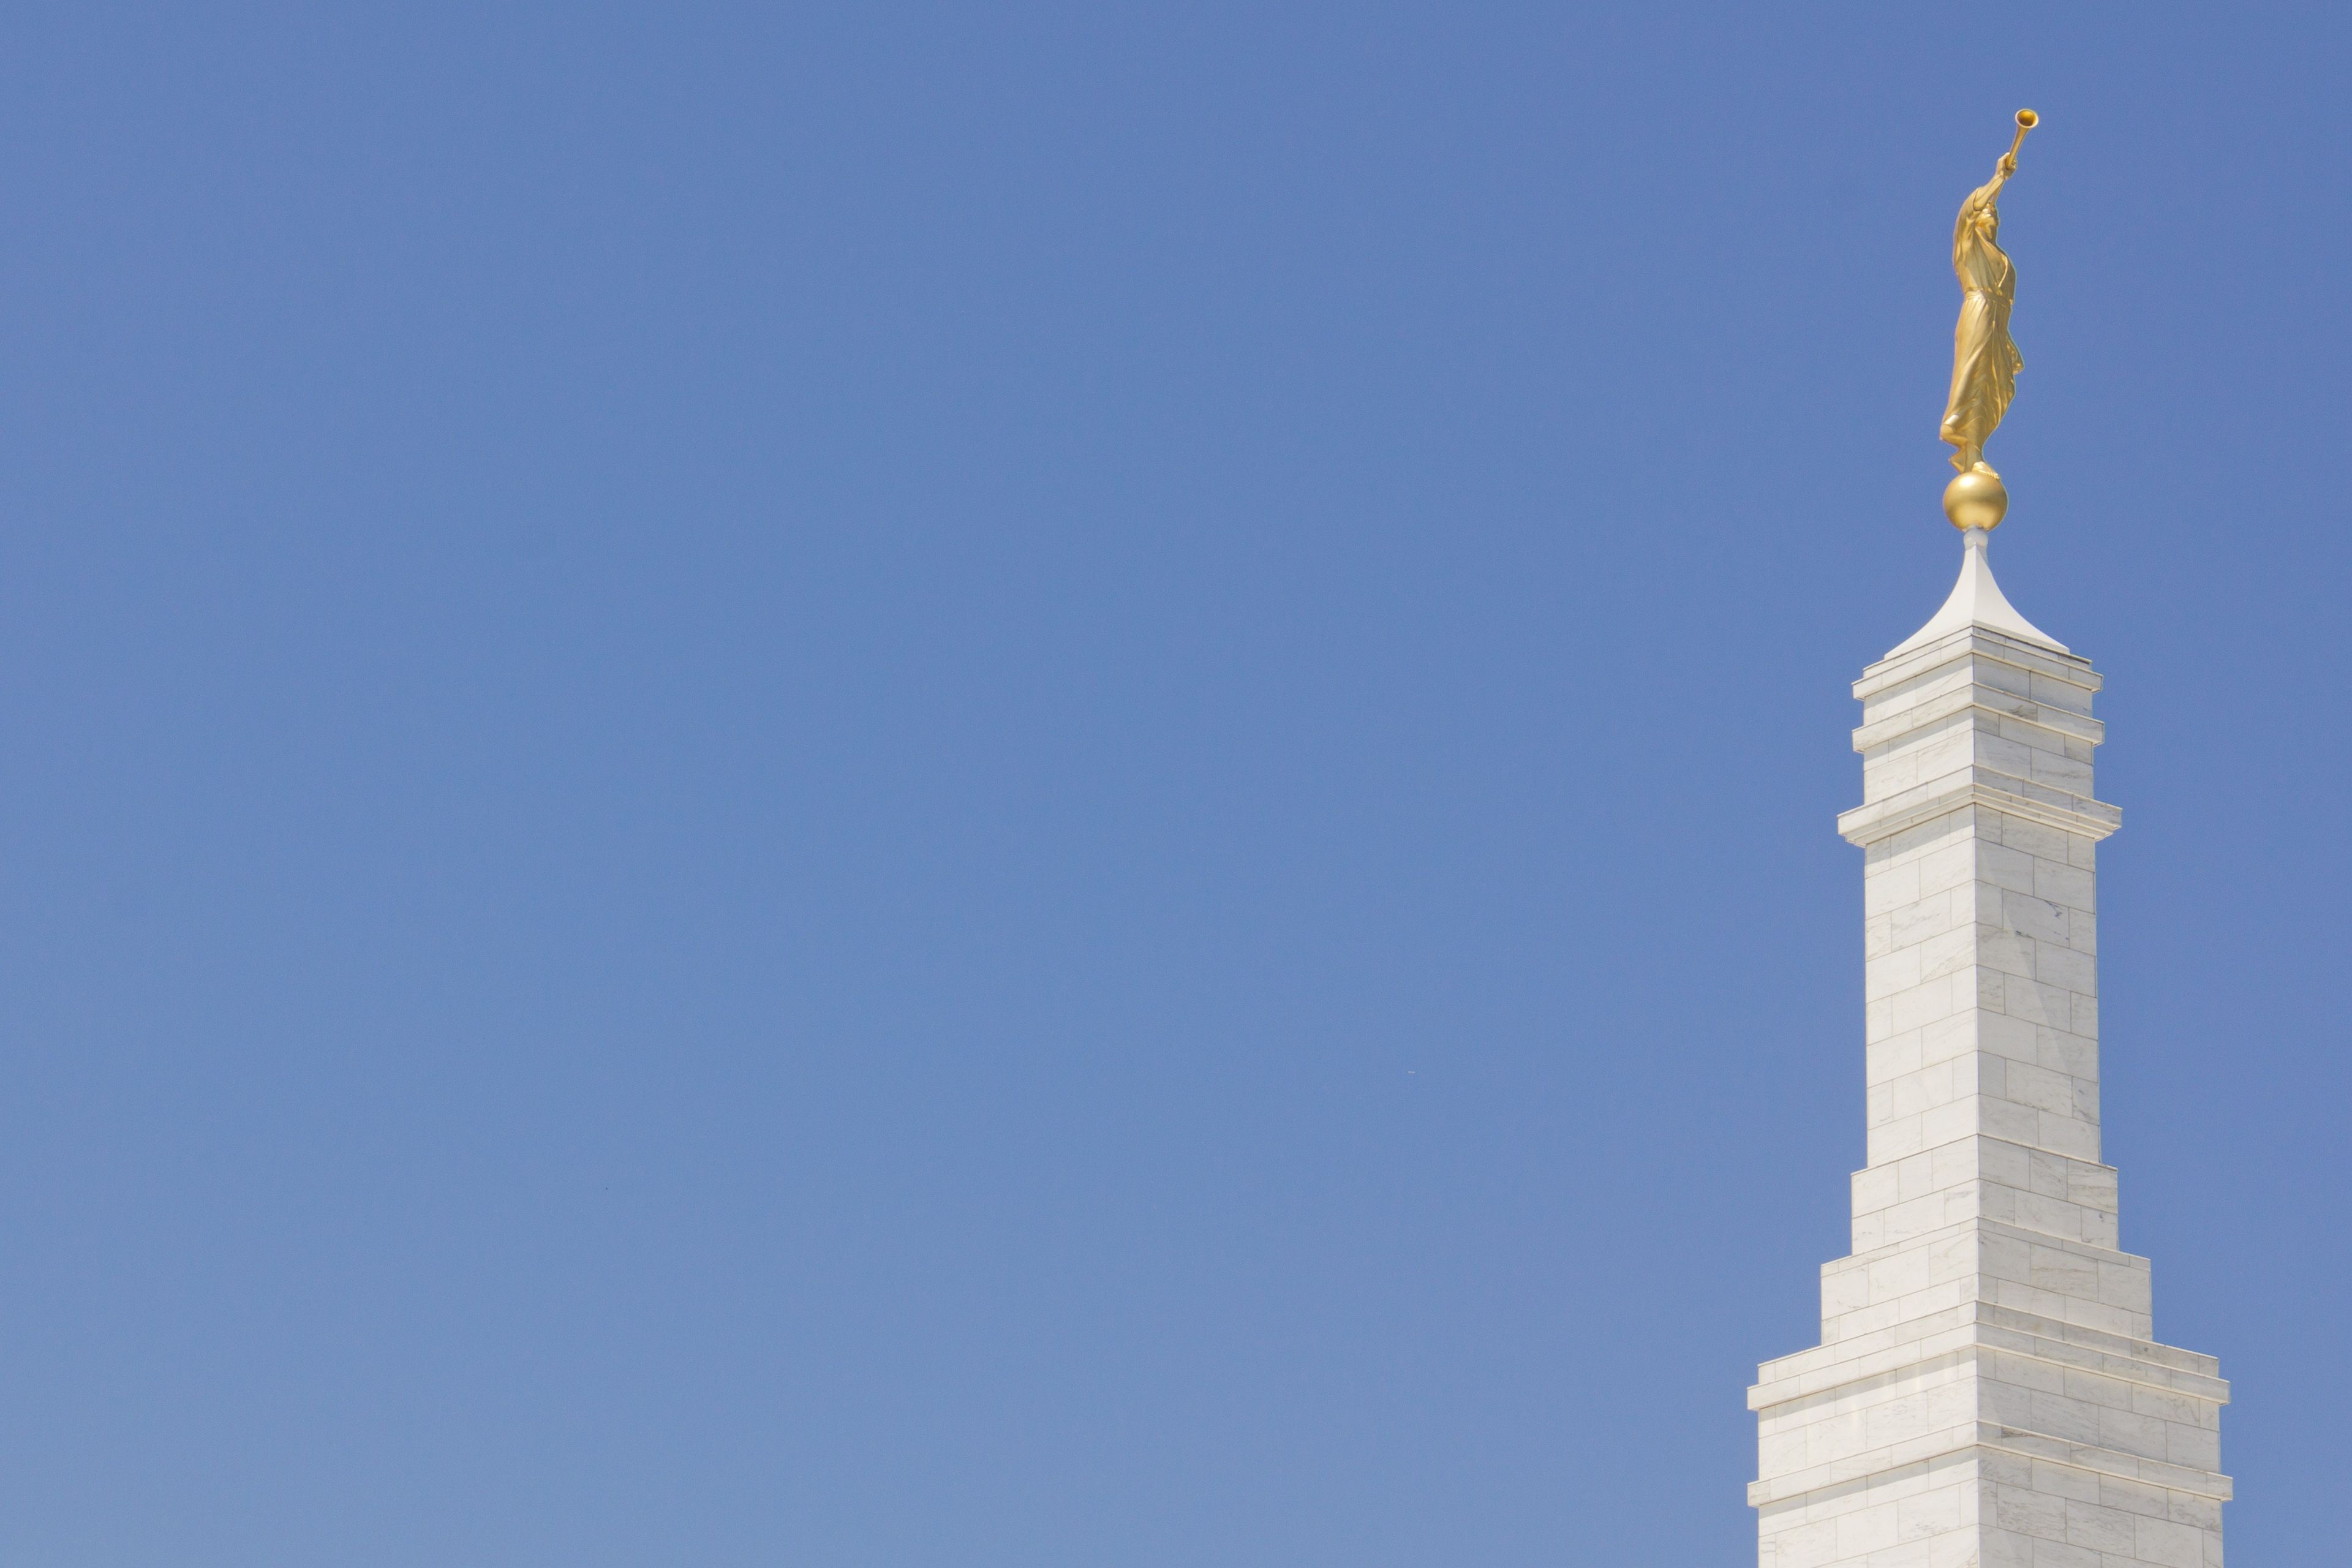 The angel Moroni stands on top of the spire of the Columbia South Carolina Temple.